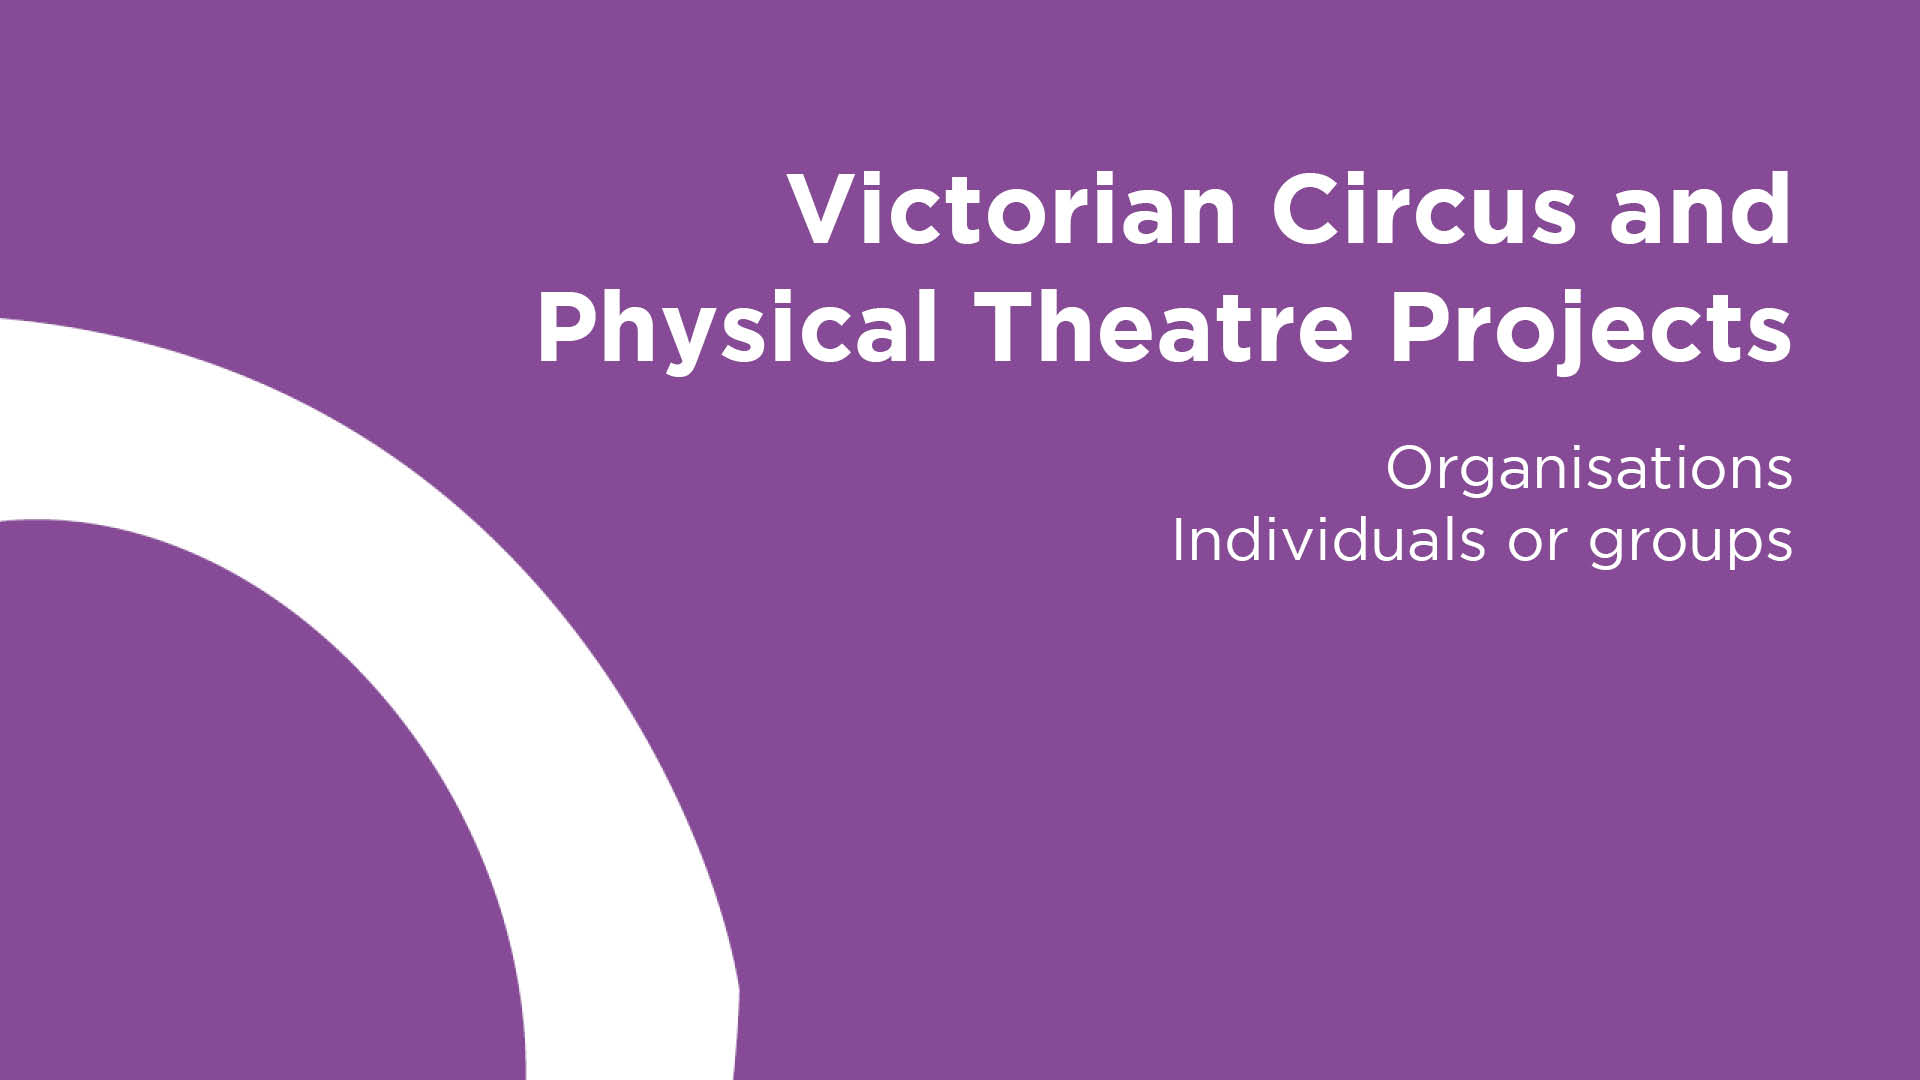 Victorian Circus and Physical Theatre Projects for Organisations 